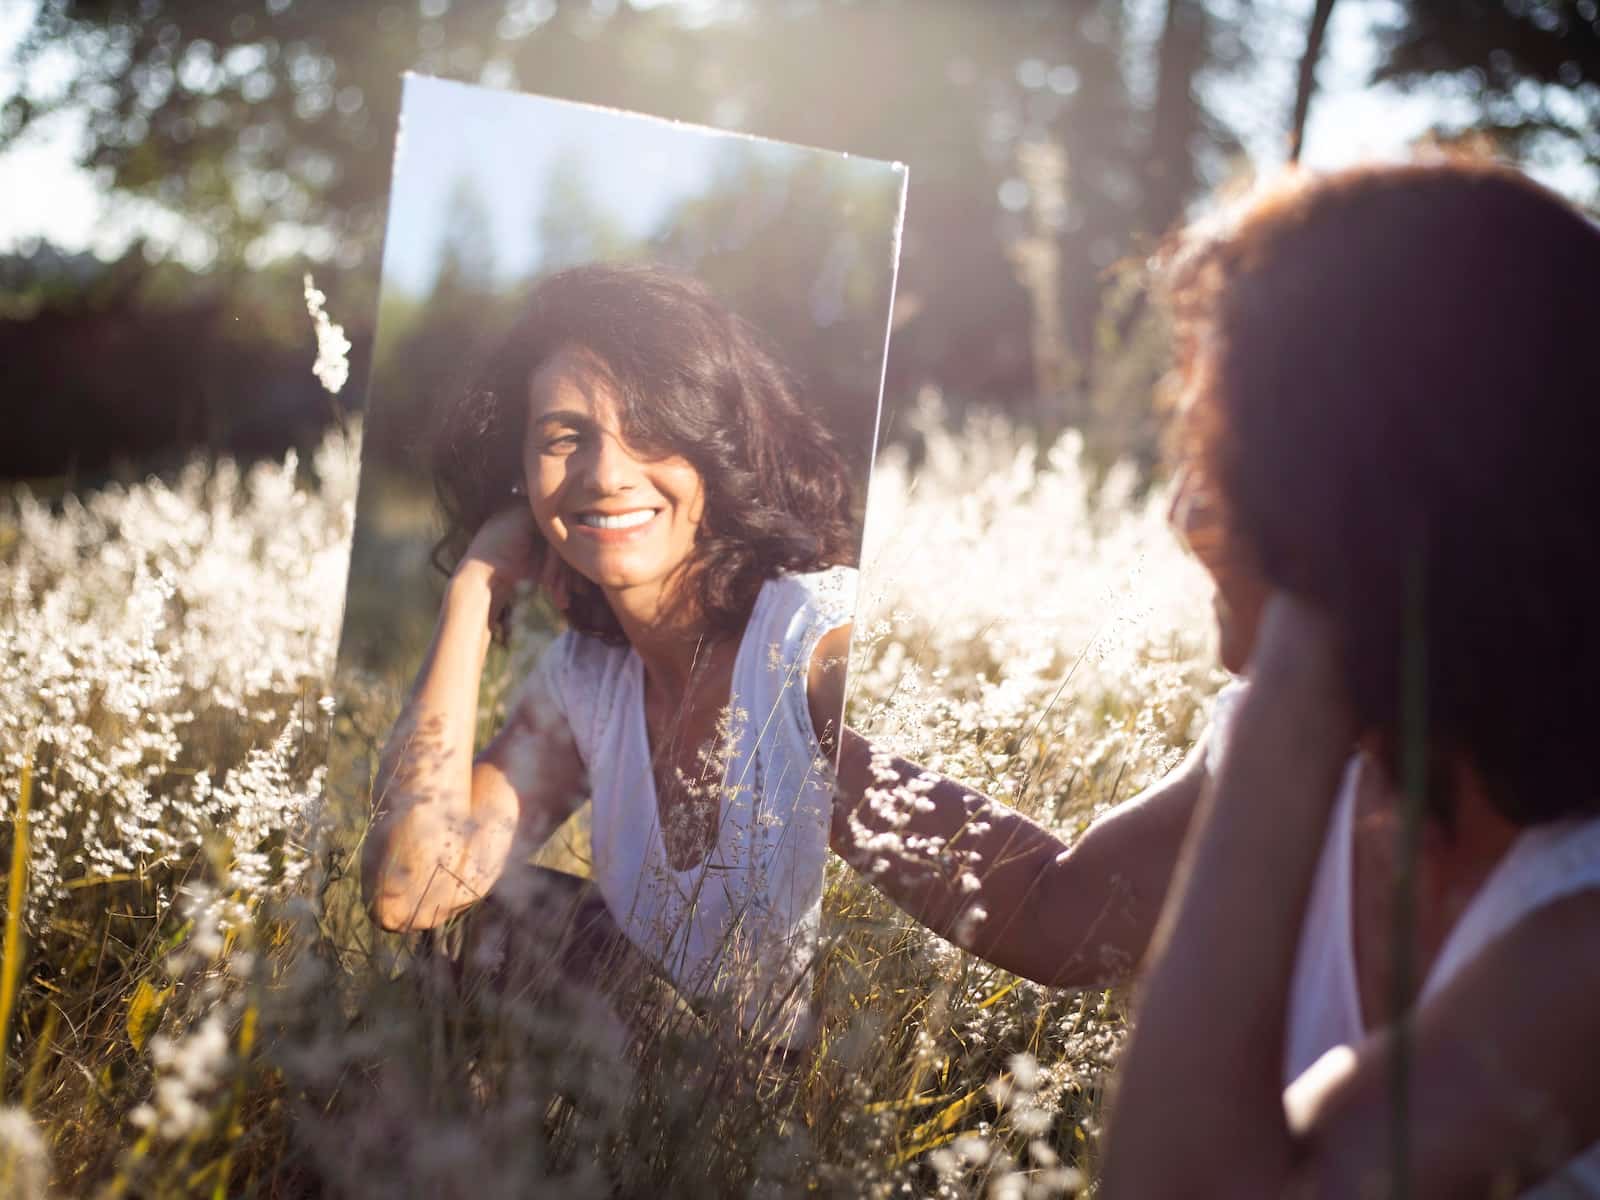 woman looking at herself in the mirror in a field of flowers